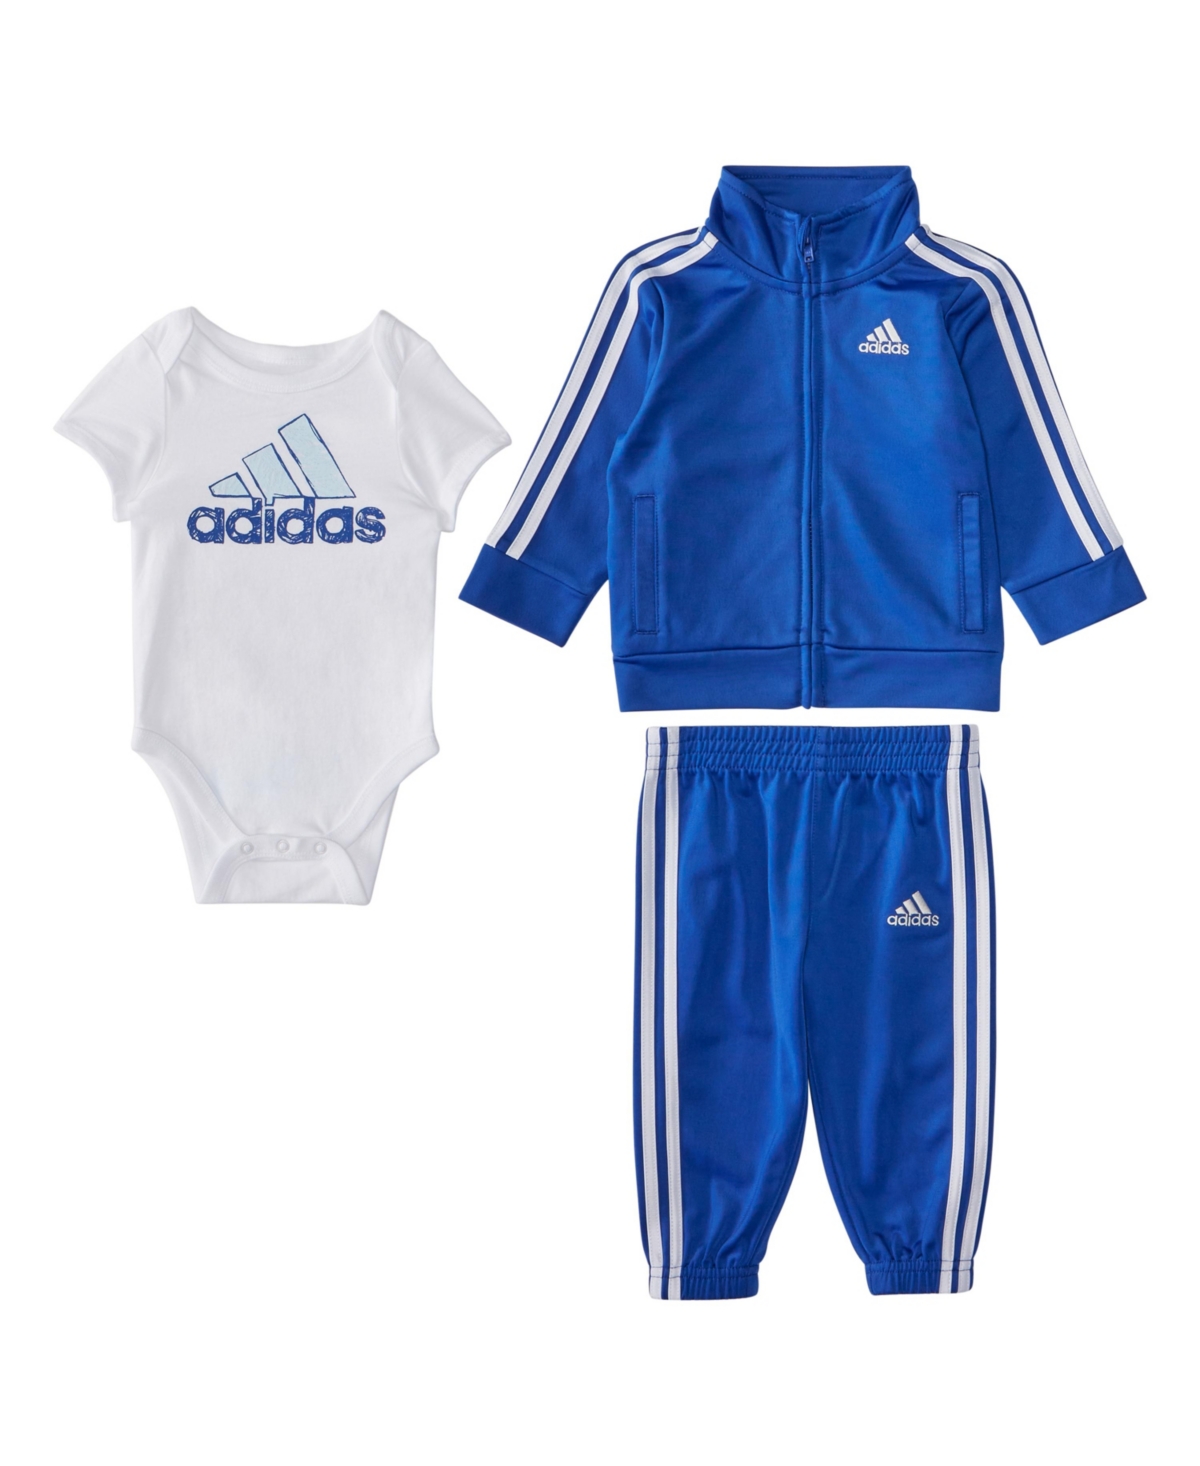 adidas Baby Boys Tricot Tracksuit and Body Shirt, 3-Piece Set